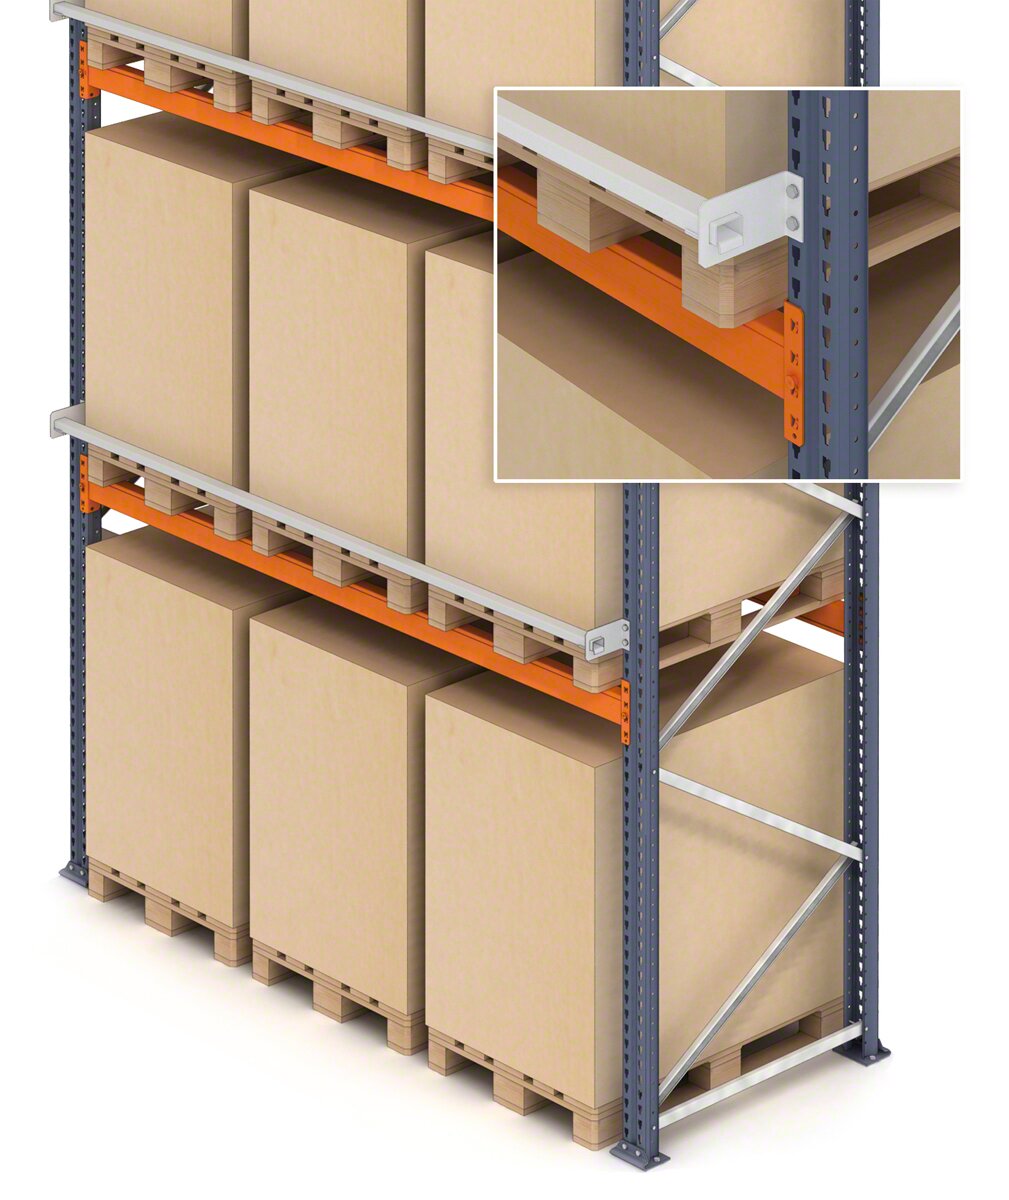 It is possible to add a safety profile for the goods deposited on the pallet racks